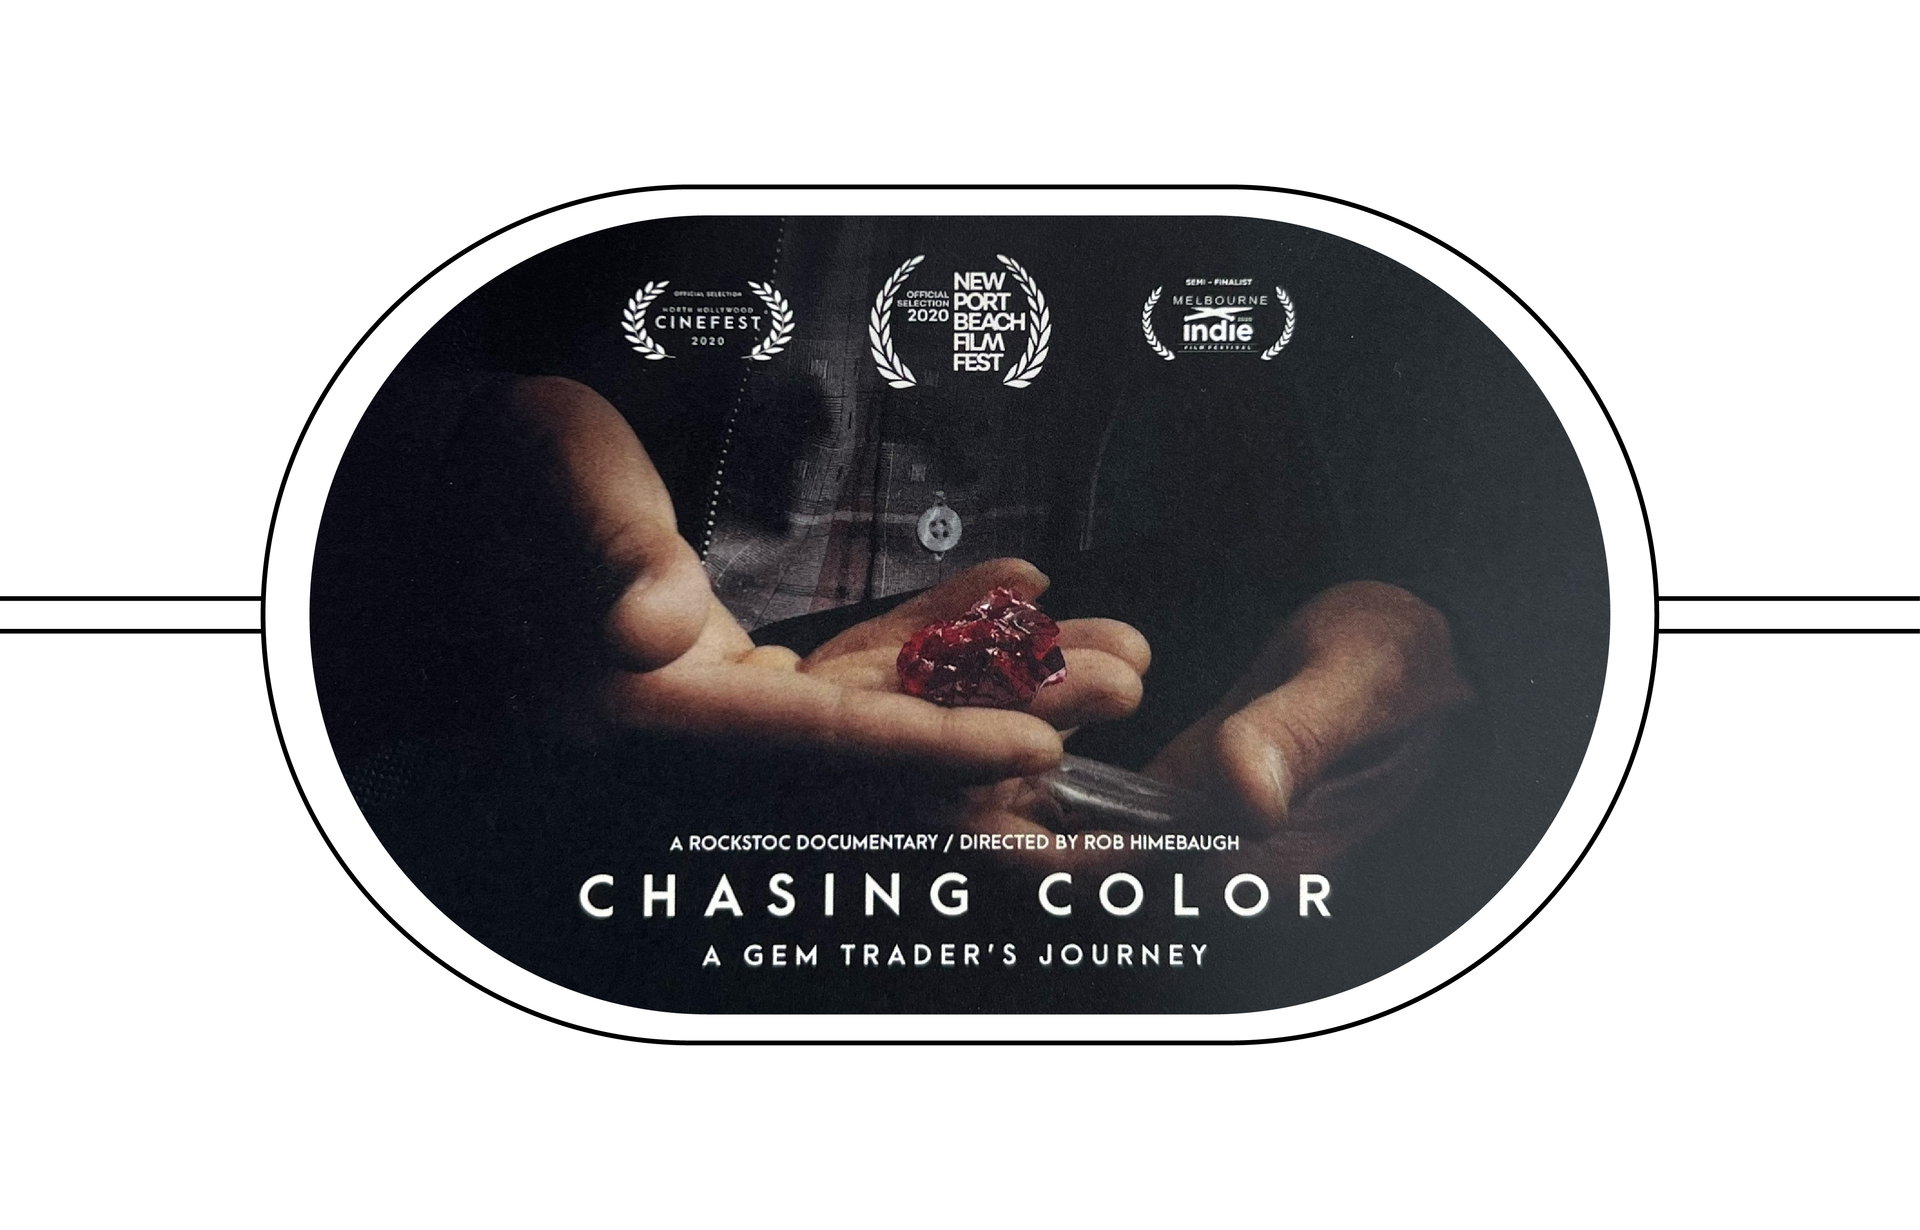 Load video: Chasing Color-A Gem Trader&#39;s Journey (2019) featuring stone dealer, Yvonne.